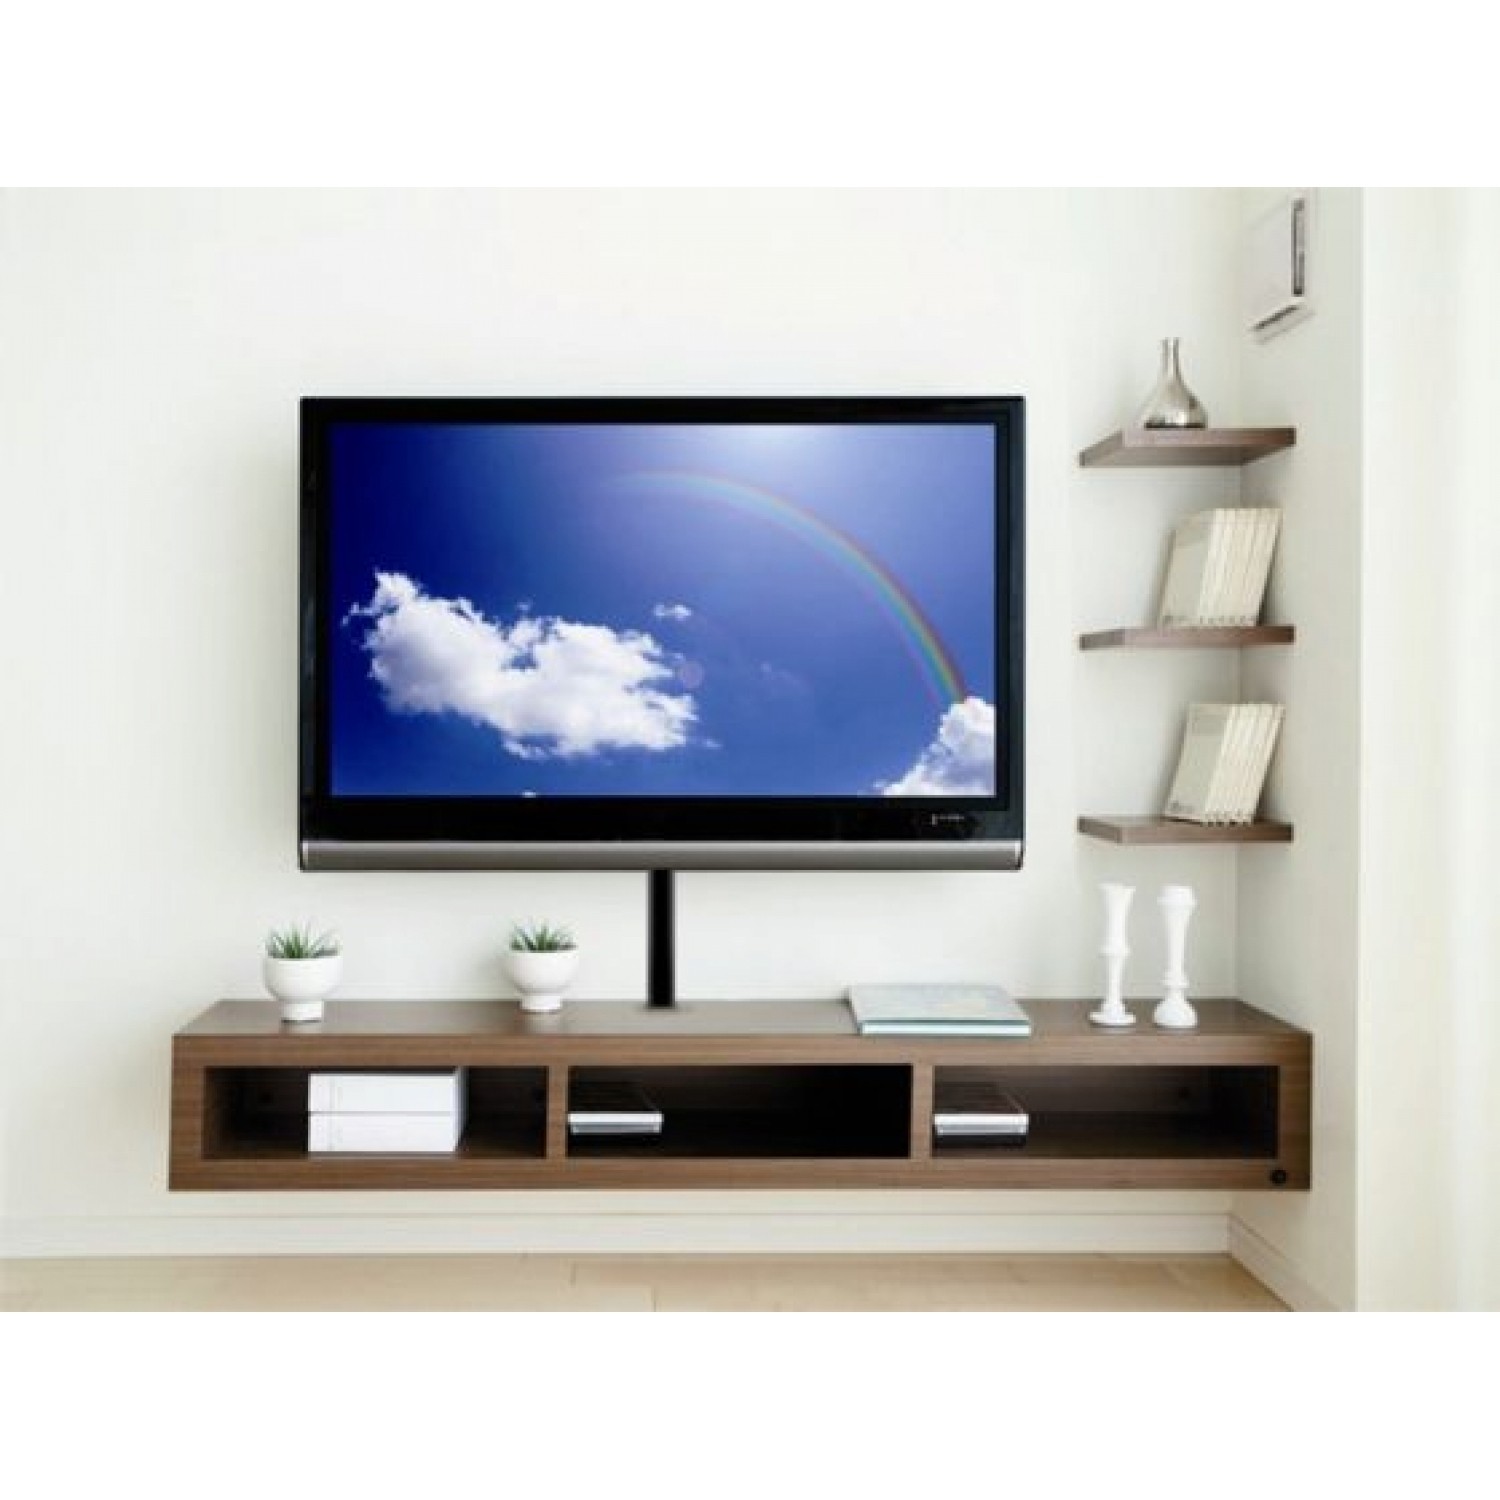 Use floating shelves to decorate your wall mounted television